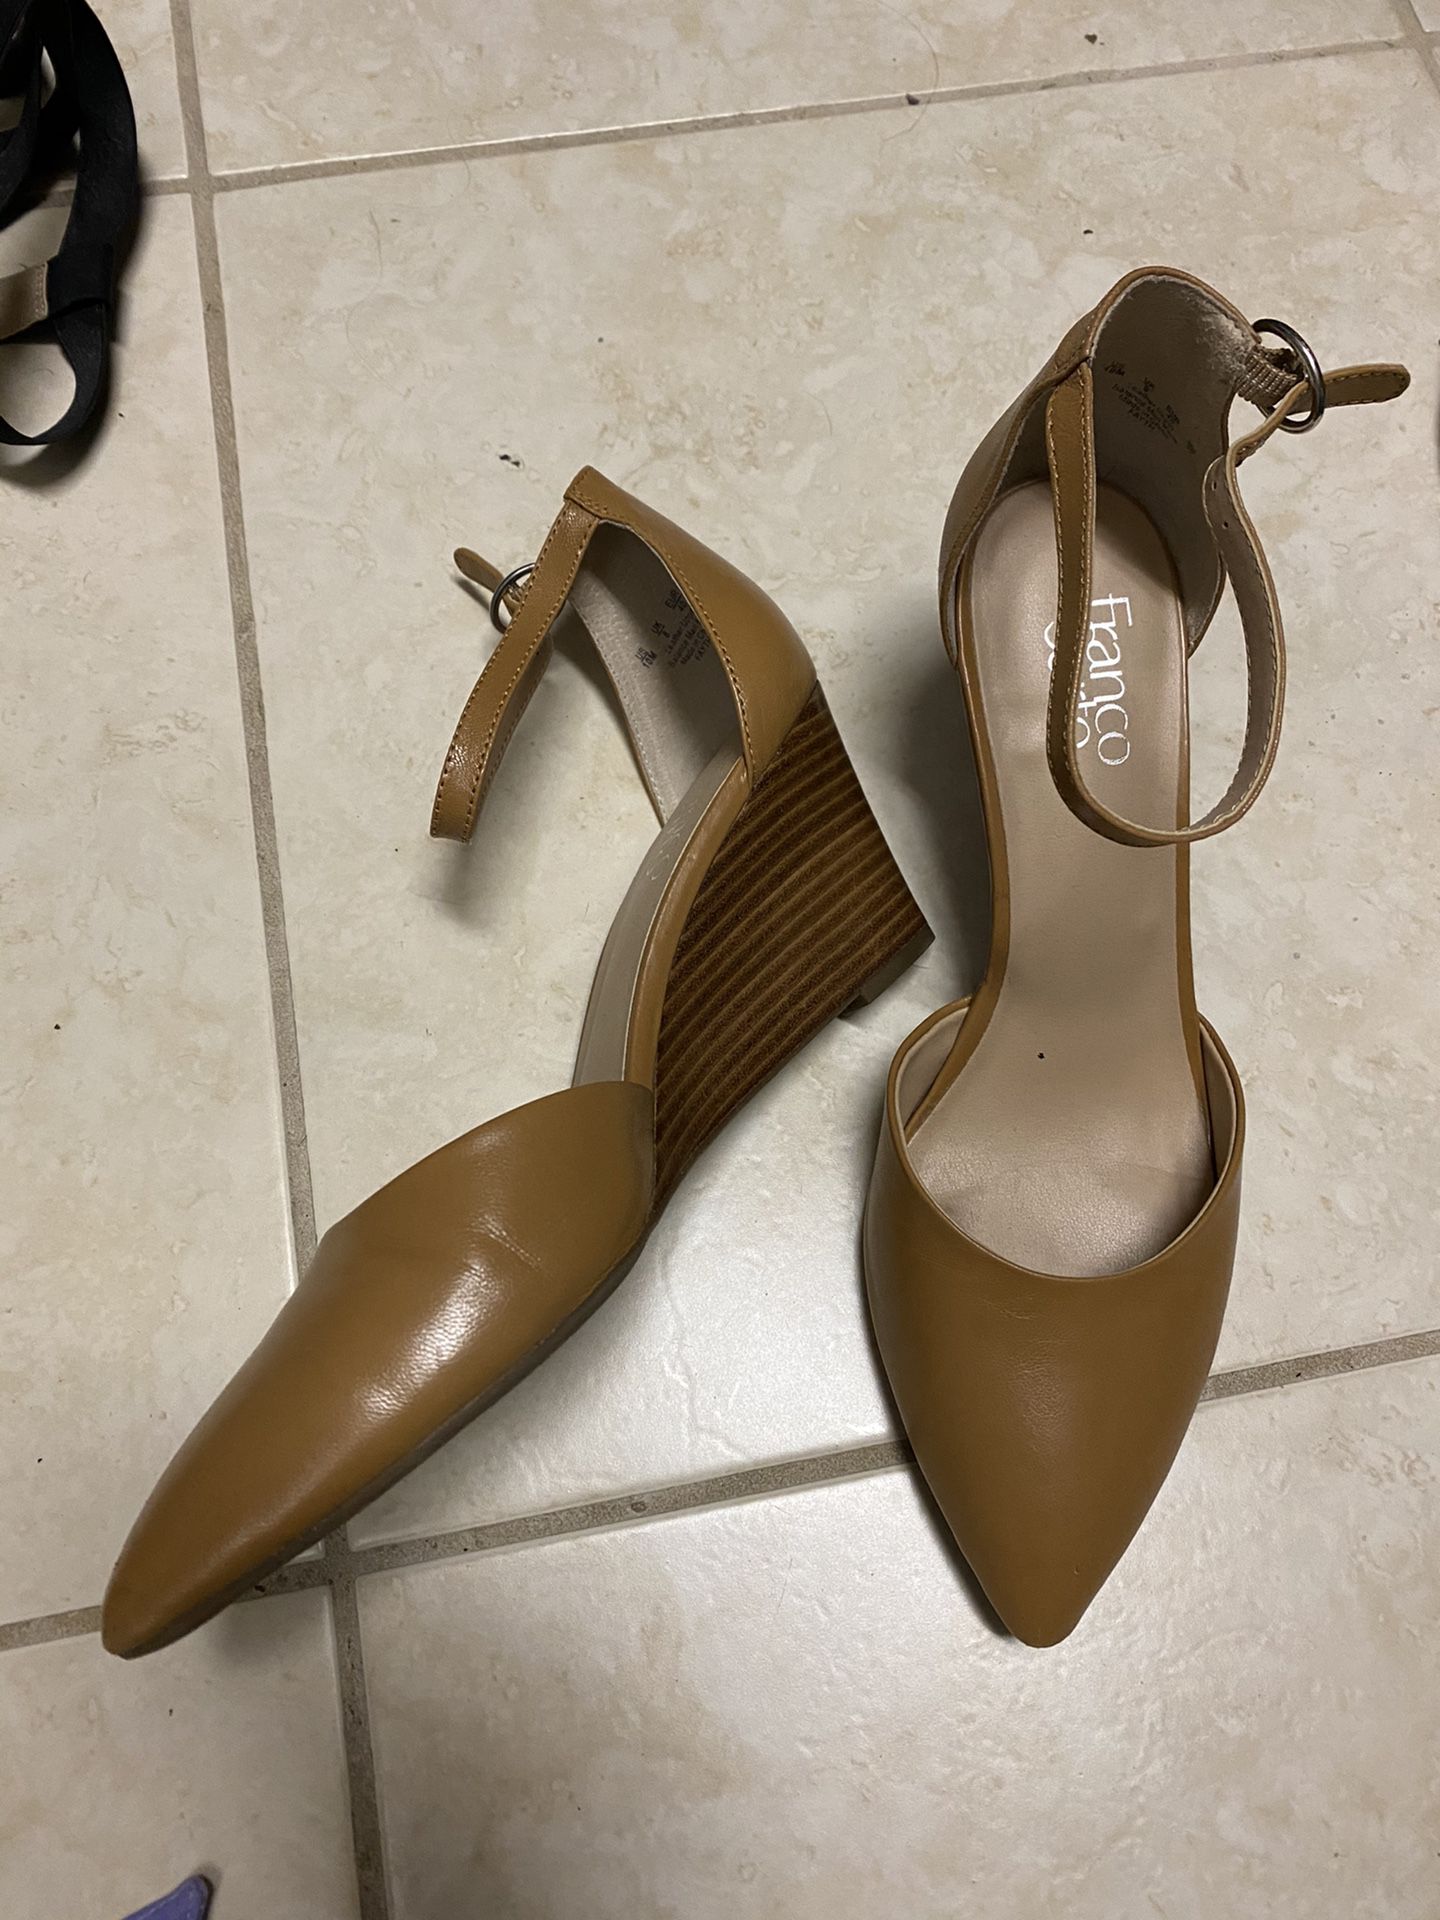 6 Pair Of Women’s Shoes Size 10!